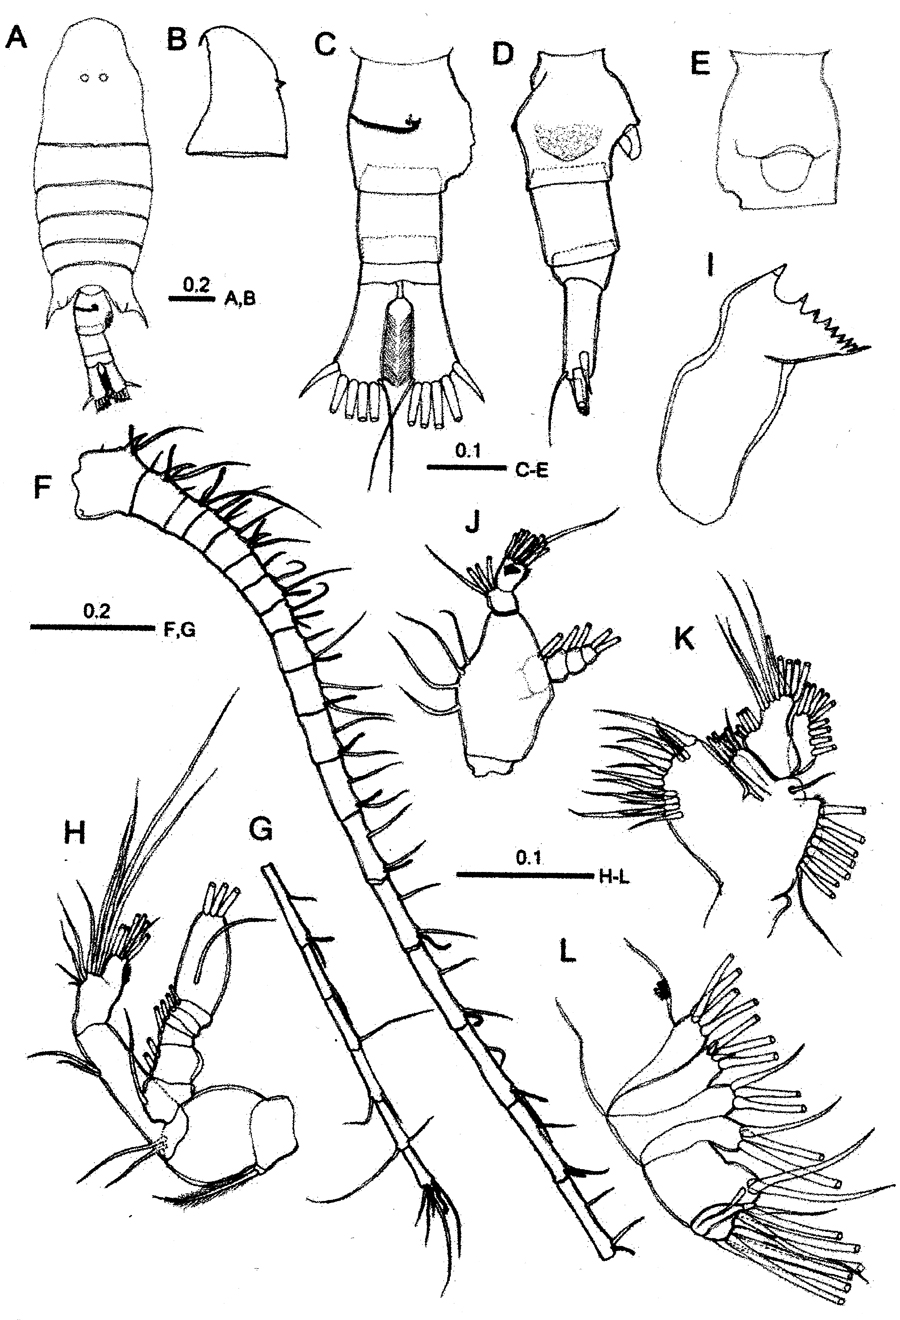 Species Centropages aegypticus - Plate 1 of morphological figures